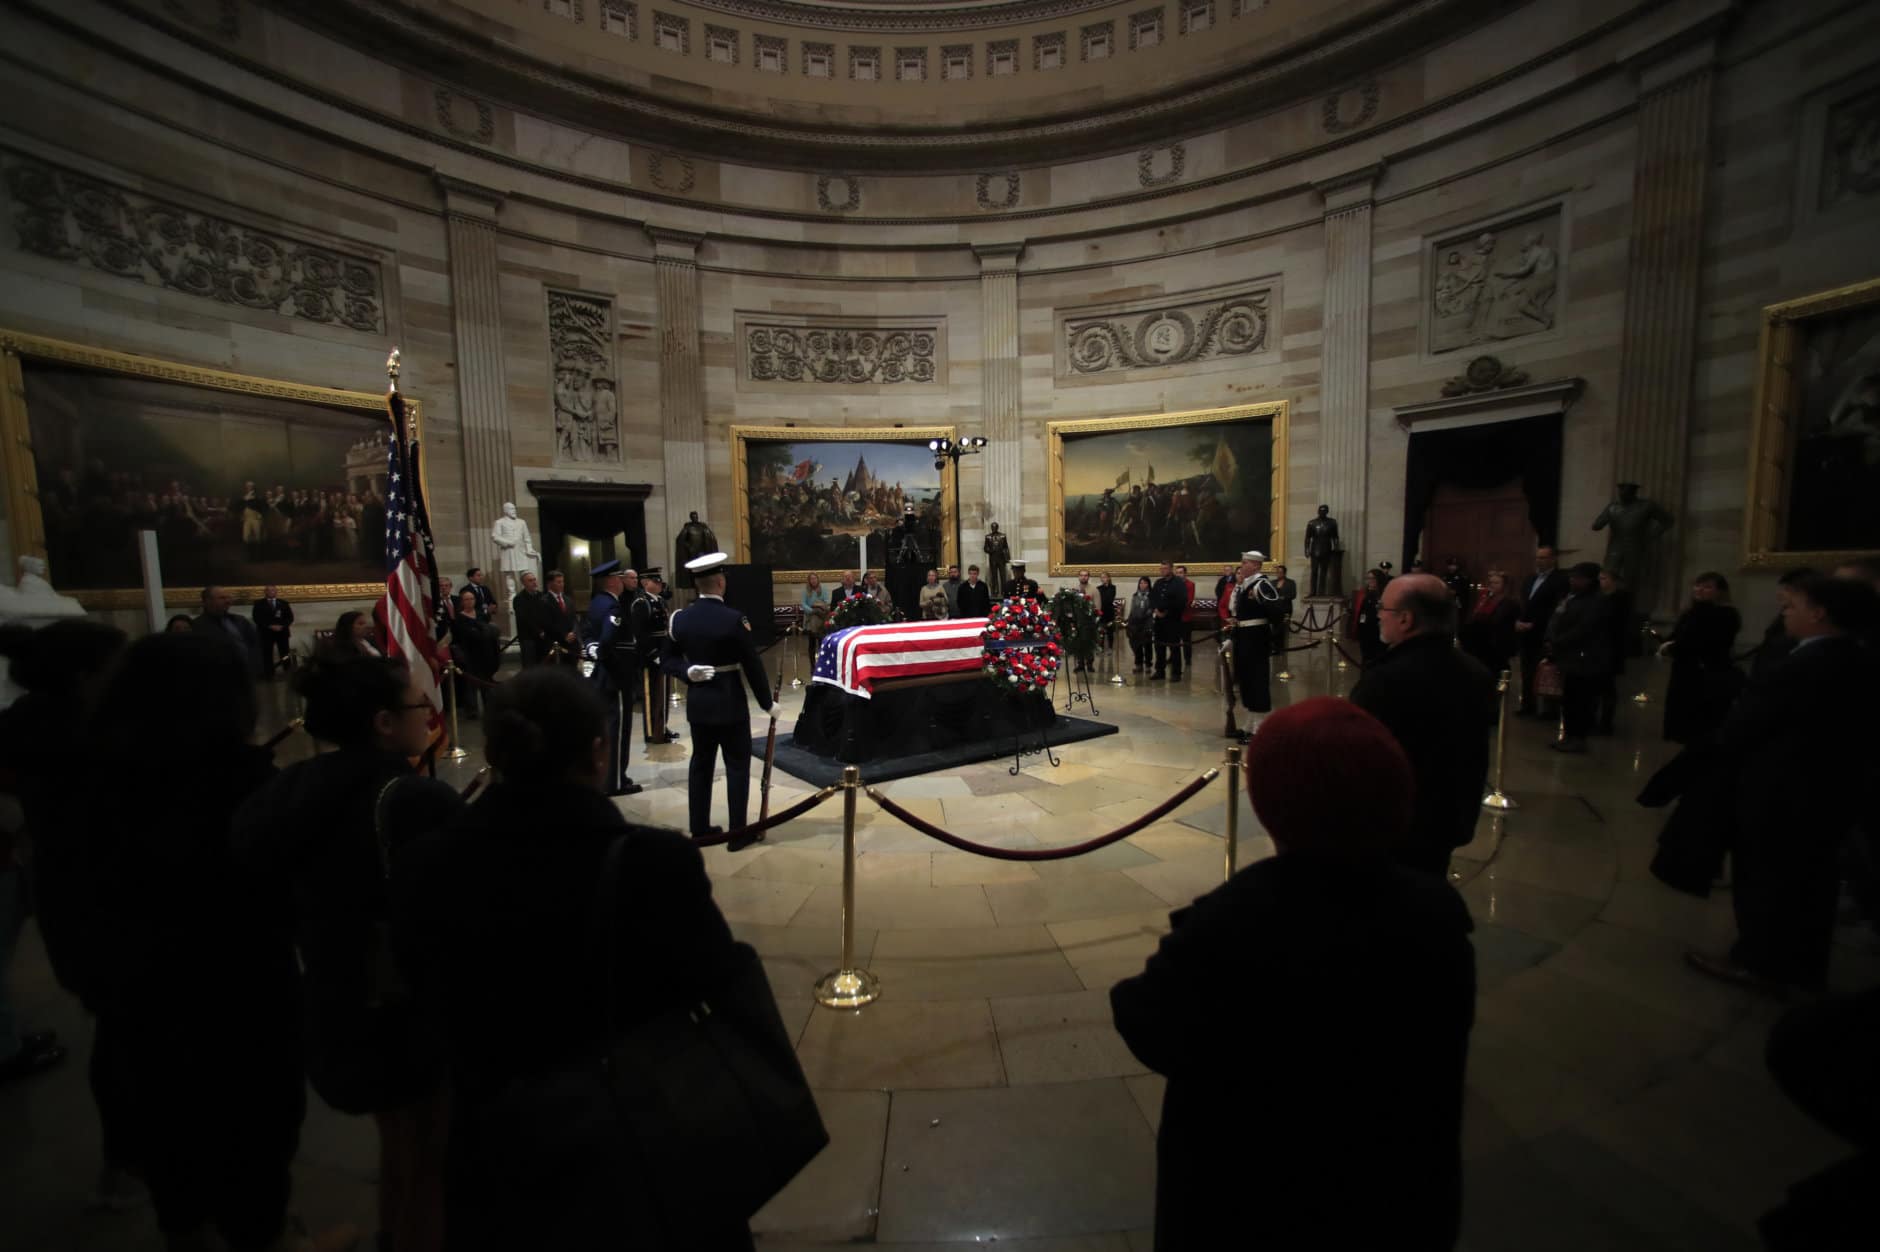 The last group of visitors pay their last respects to former President George H.W. Bush lying in state at the U.S. Capitol in Washington, Wednesday, Dec. 5, 2018. (AP Photo/Manuel Balce Ceneta)